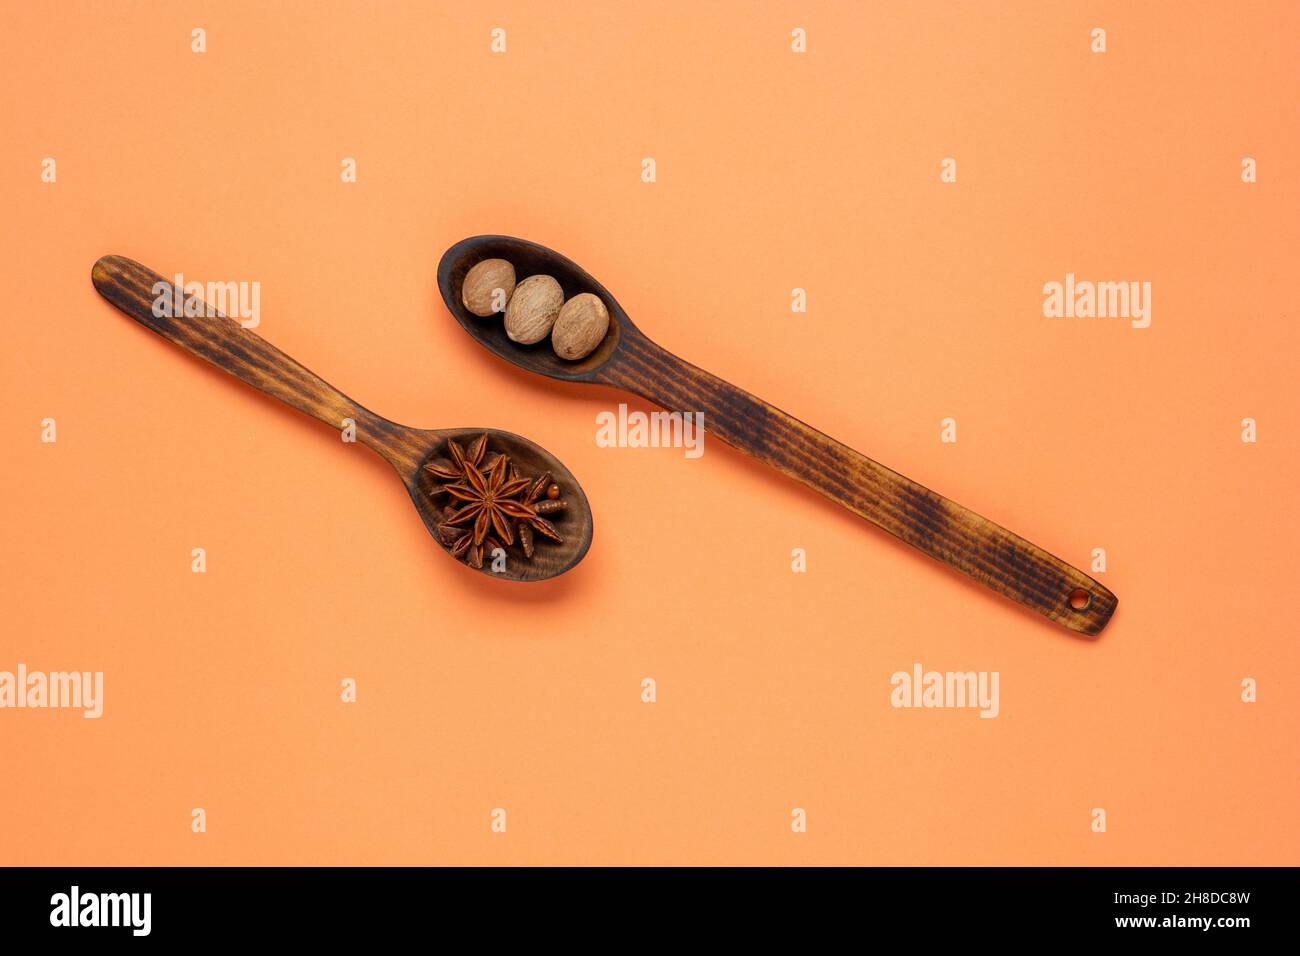 anise star and nutmeg in spoon on colorful background with copy space. Flat lay background. Stock Photo